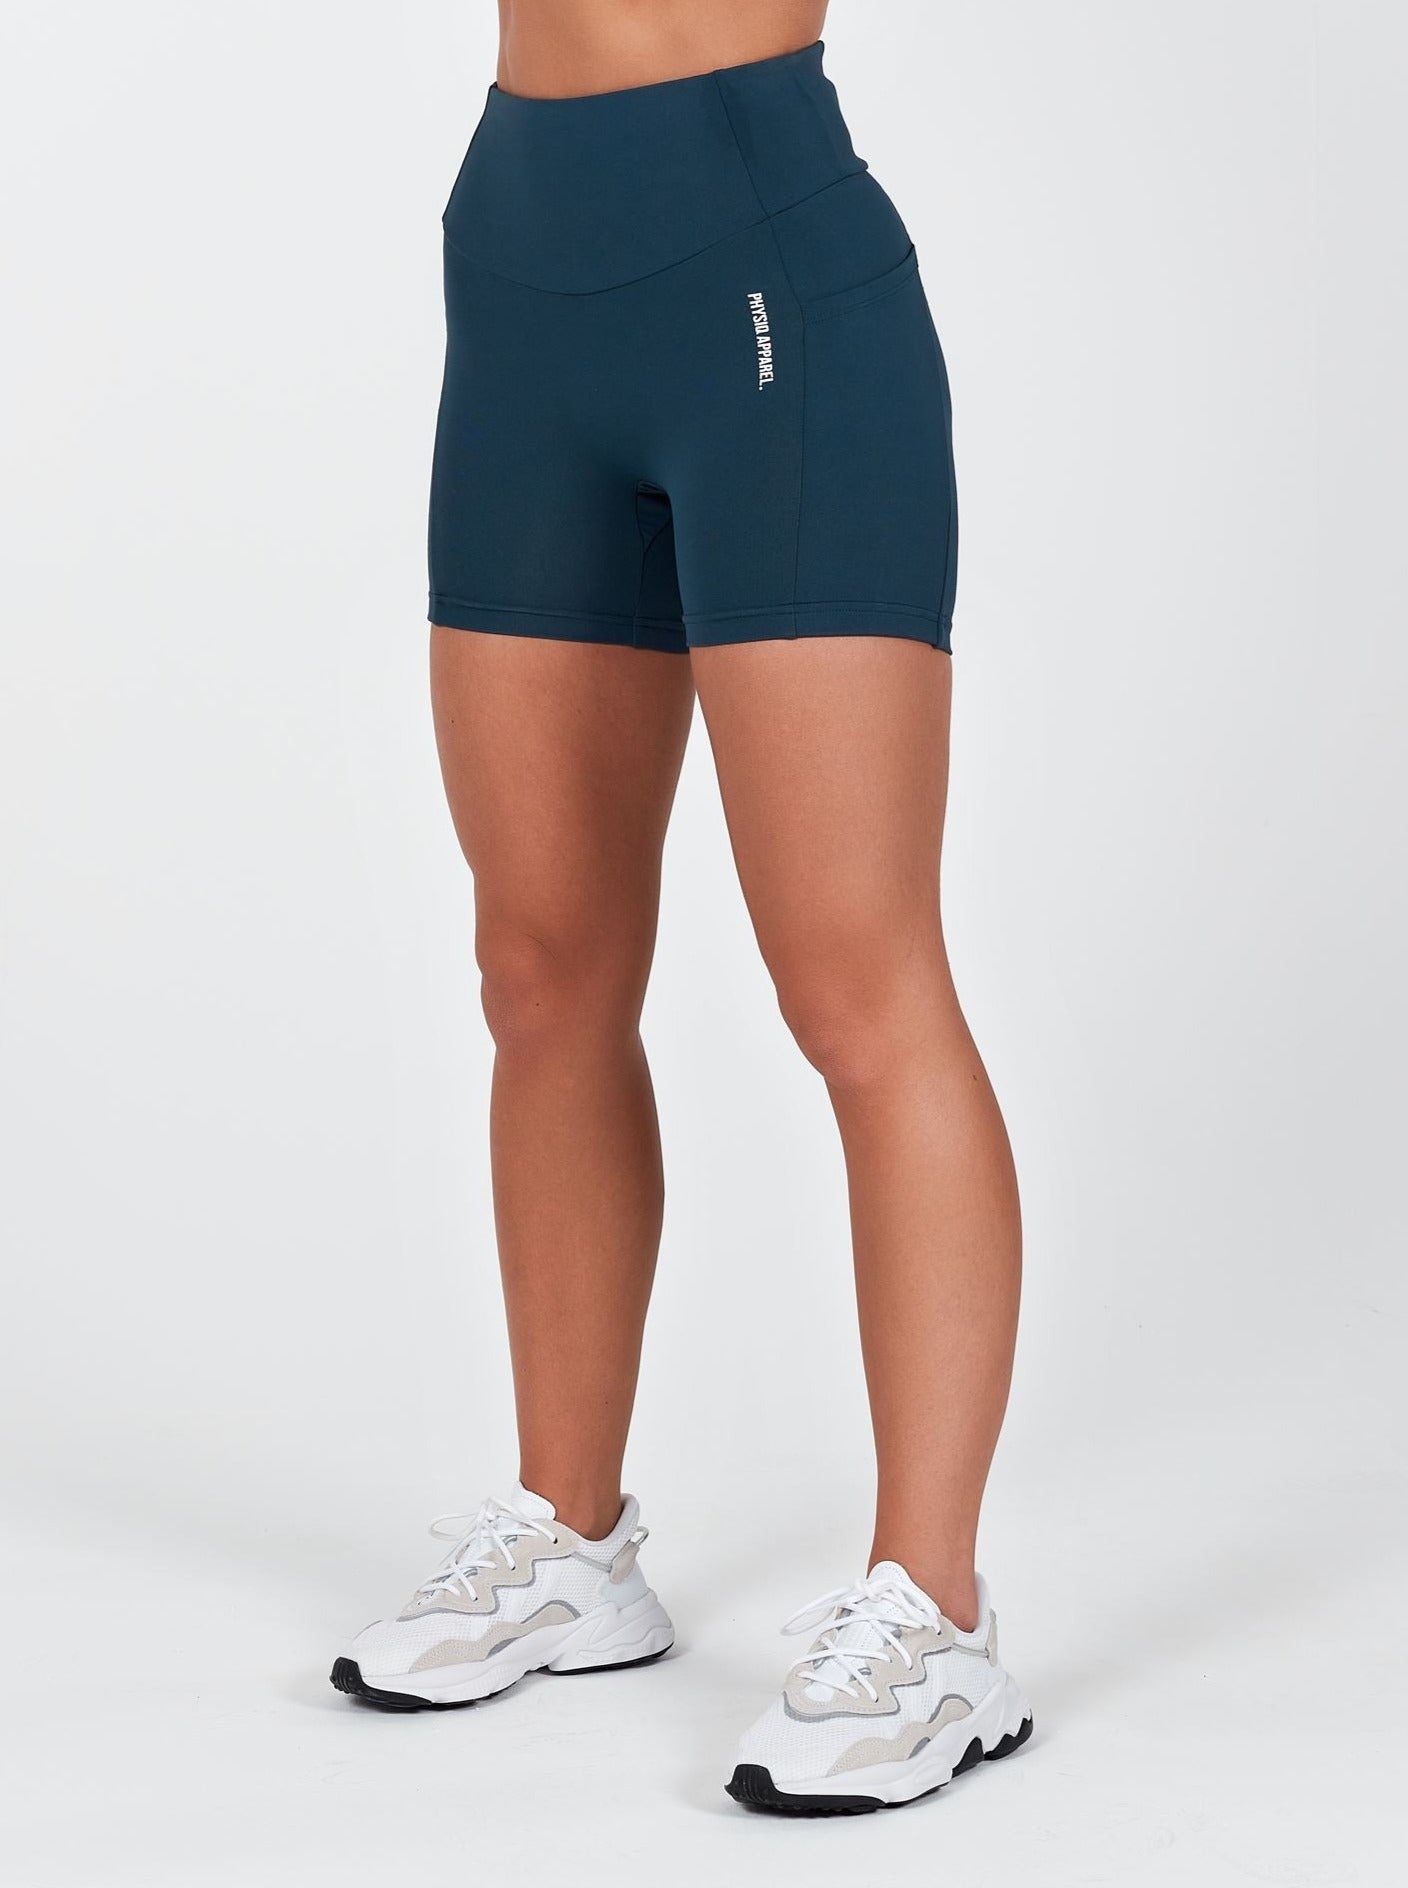 Elevate Shorts - Teal